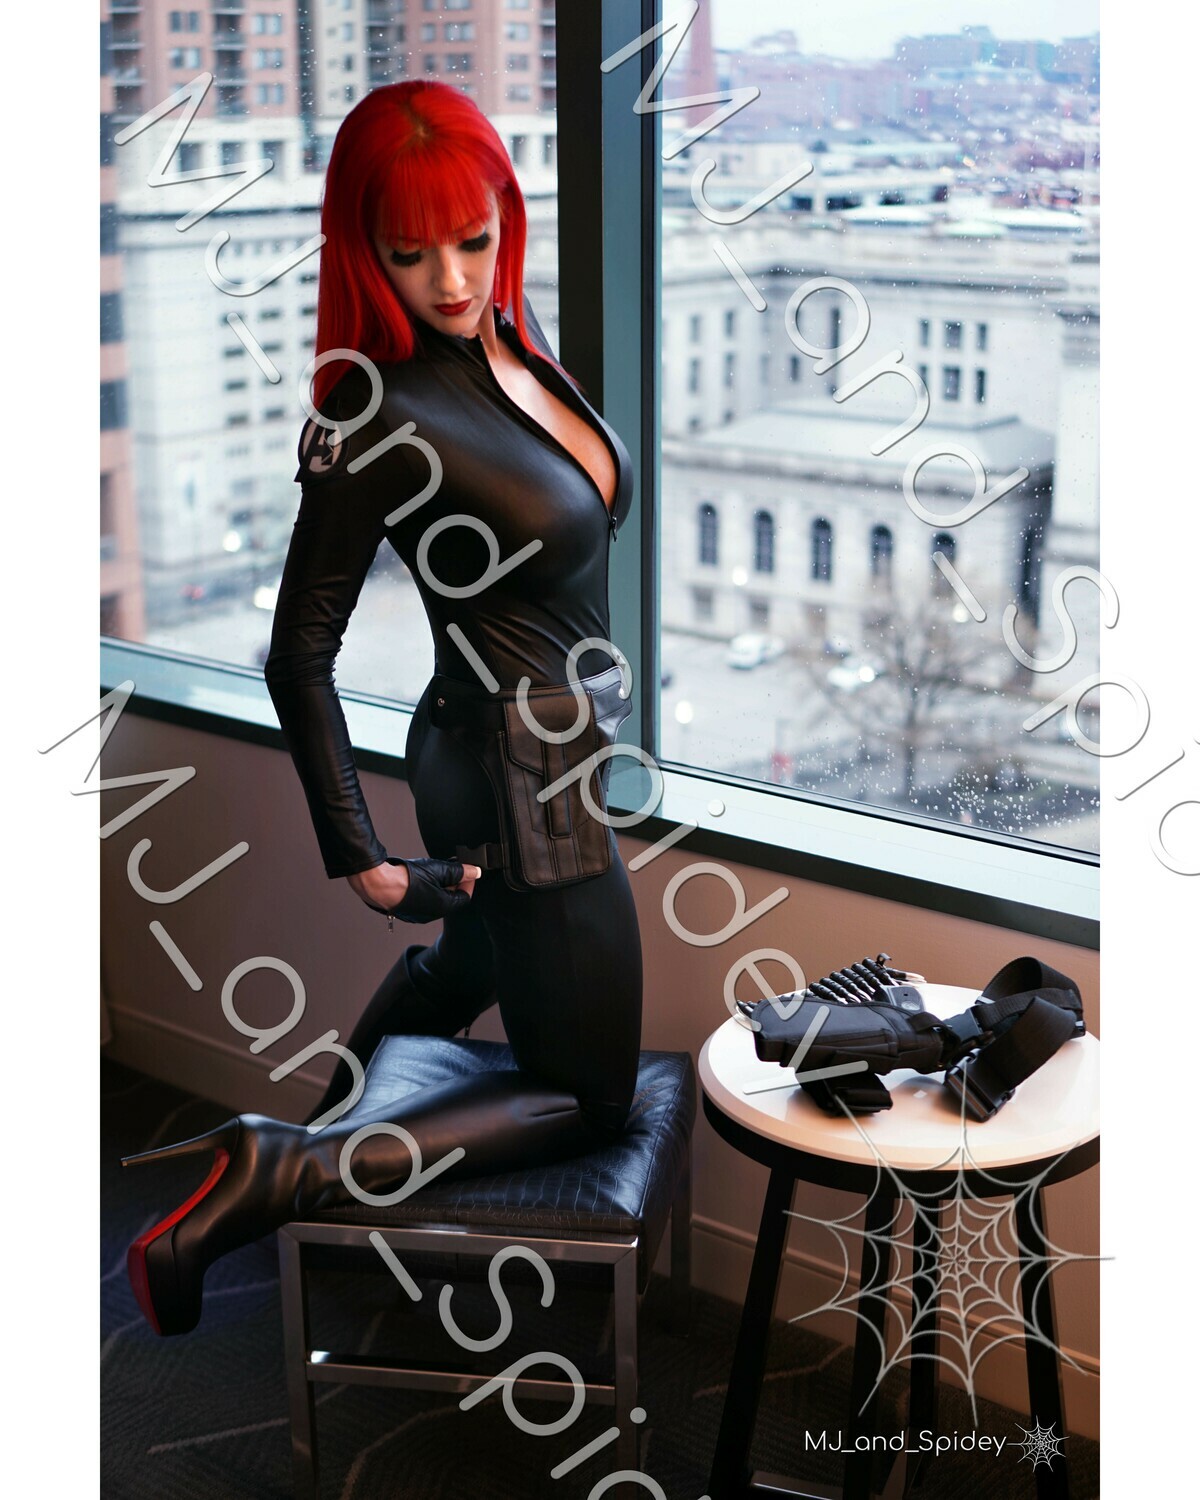 Marvel - Avengers - Black Widow 1 - Digital Cosplay Image (@MJ_and_Spidey, MJ and Spidey, Comics)